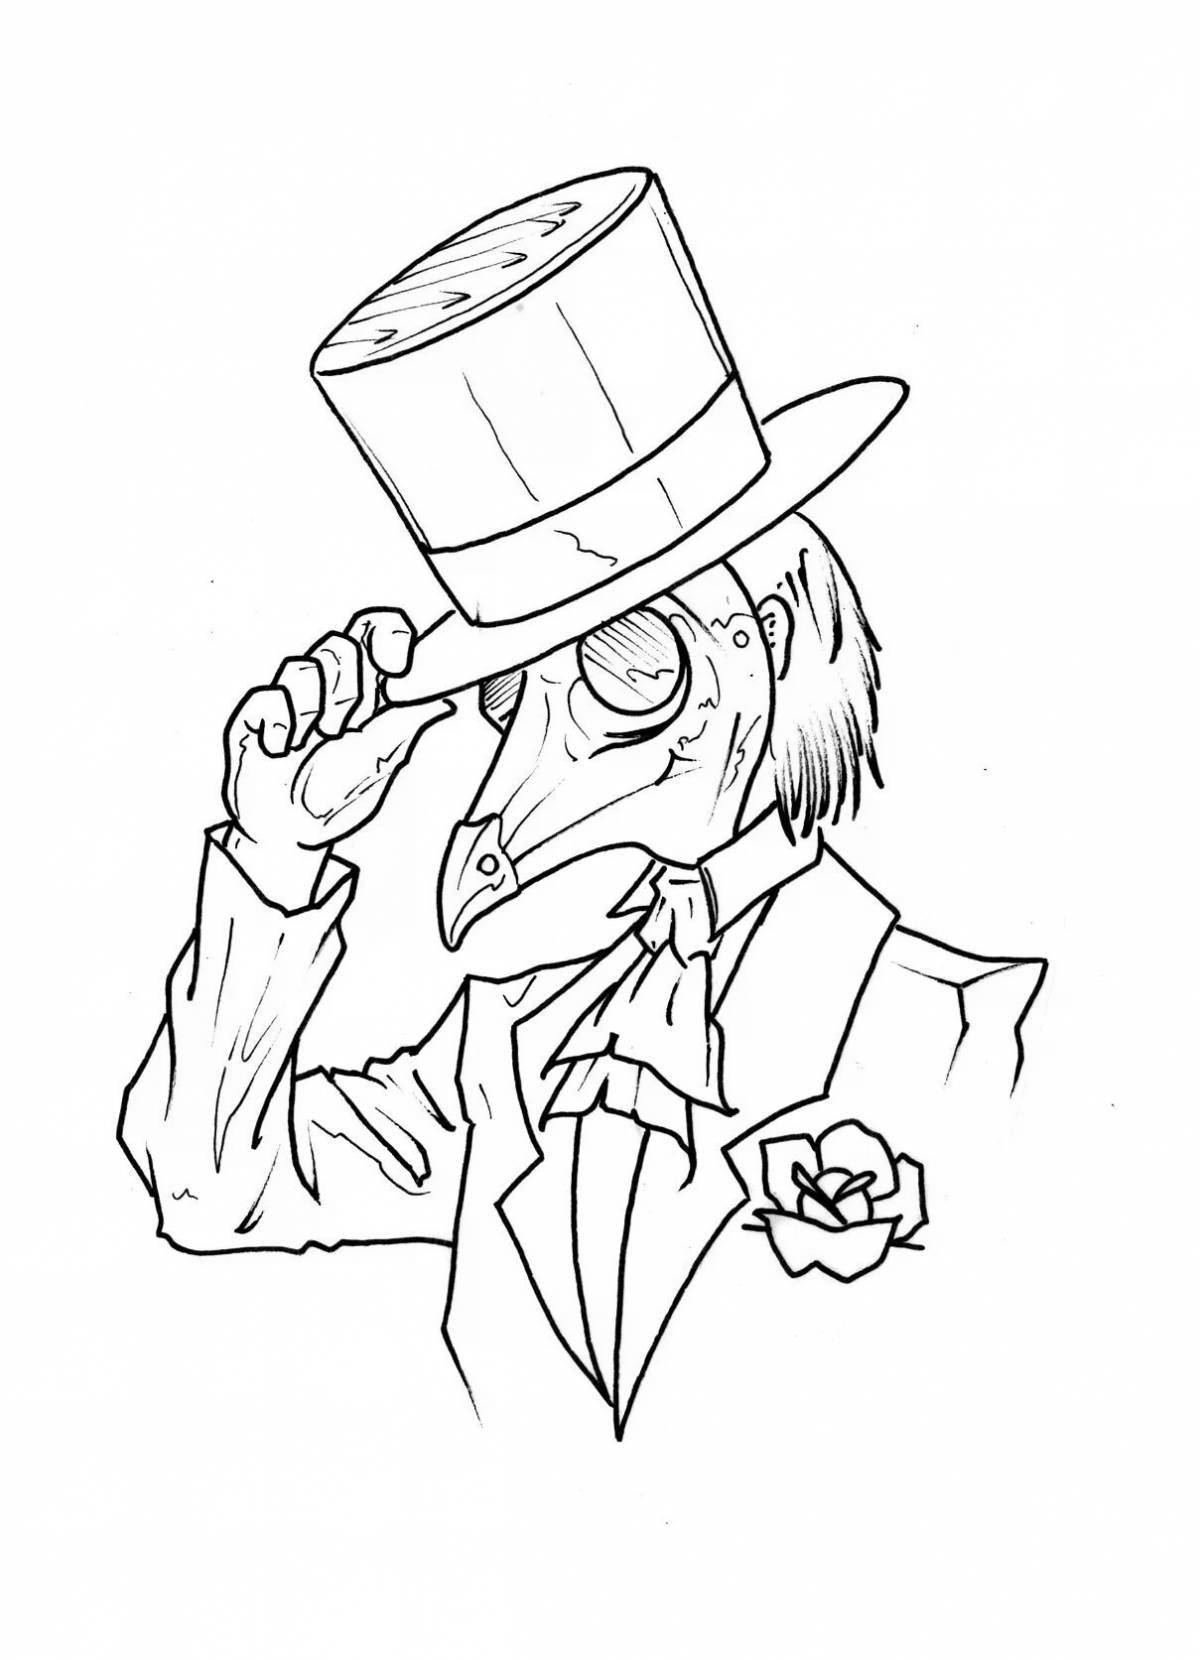 Coloring book brave plague doctor